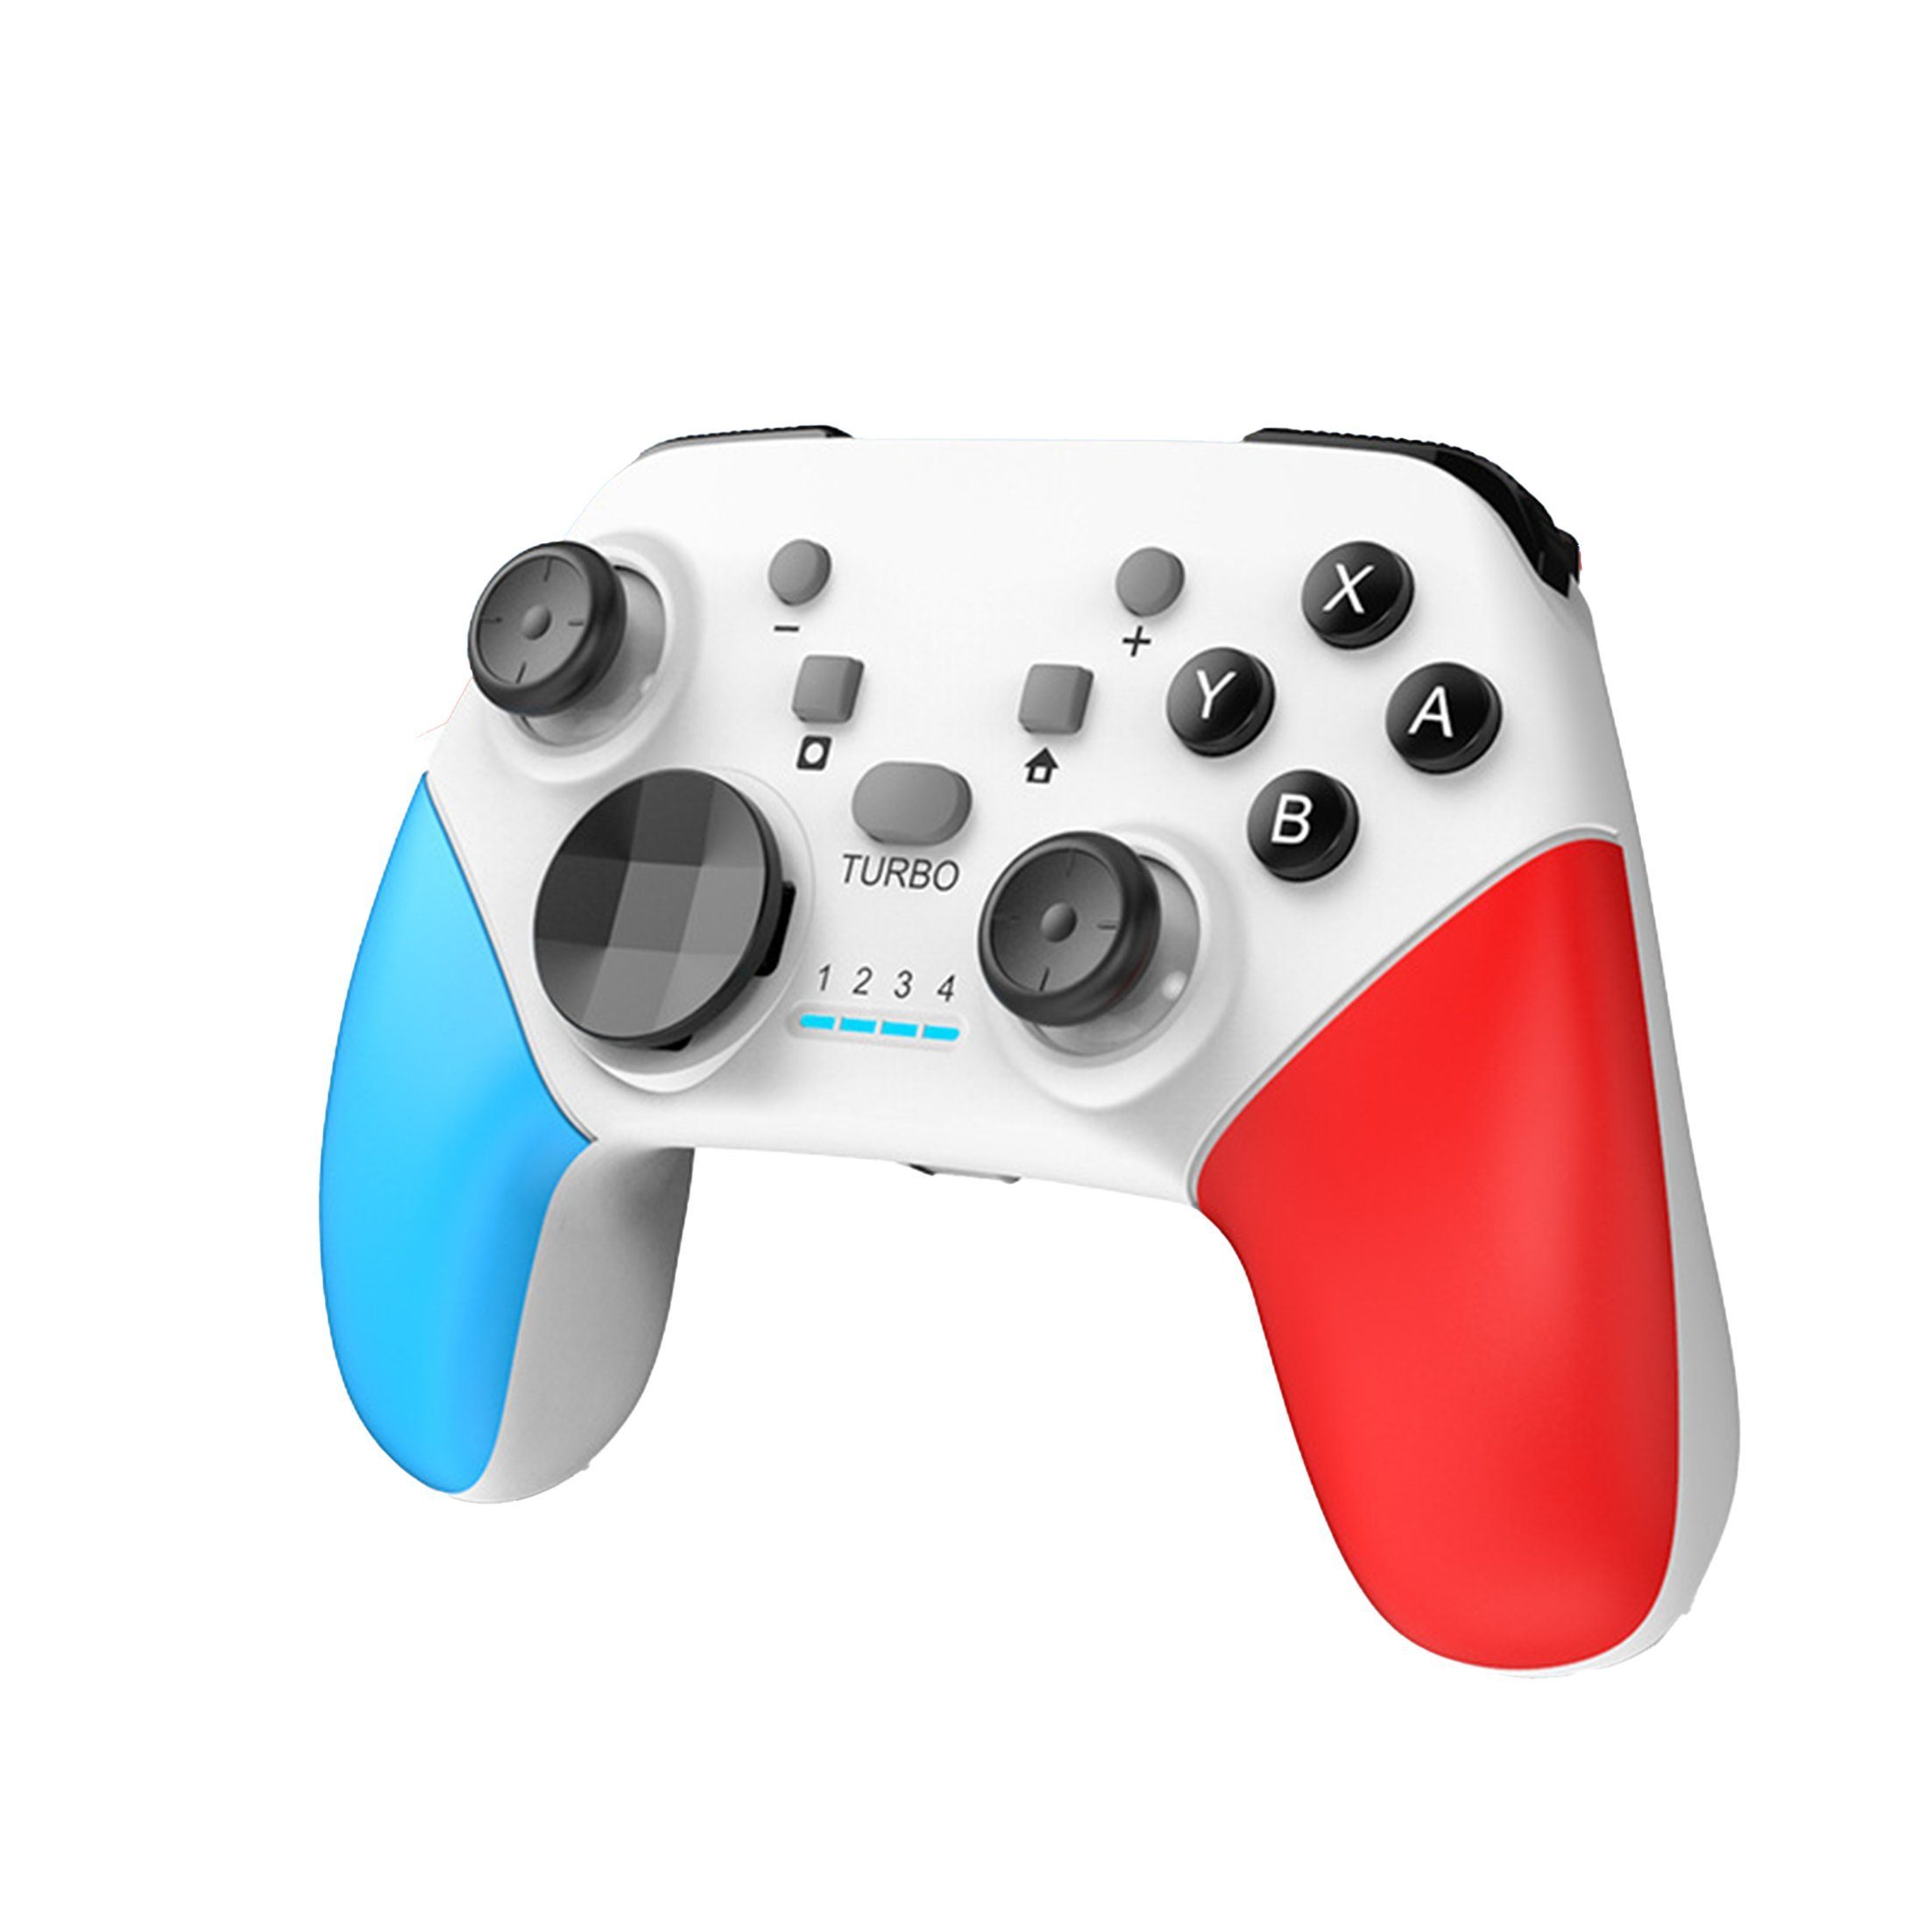 Tadow Switch Controller,kabelloses Bluetooth-Gamepad,für PC,SWITCH,Android Nintendo-Controller